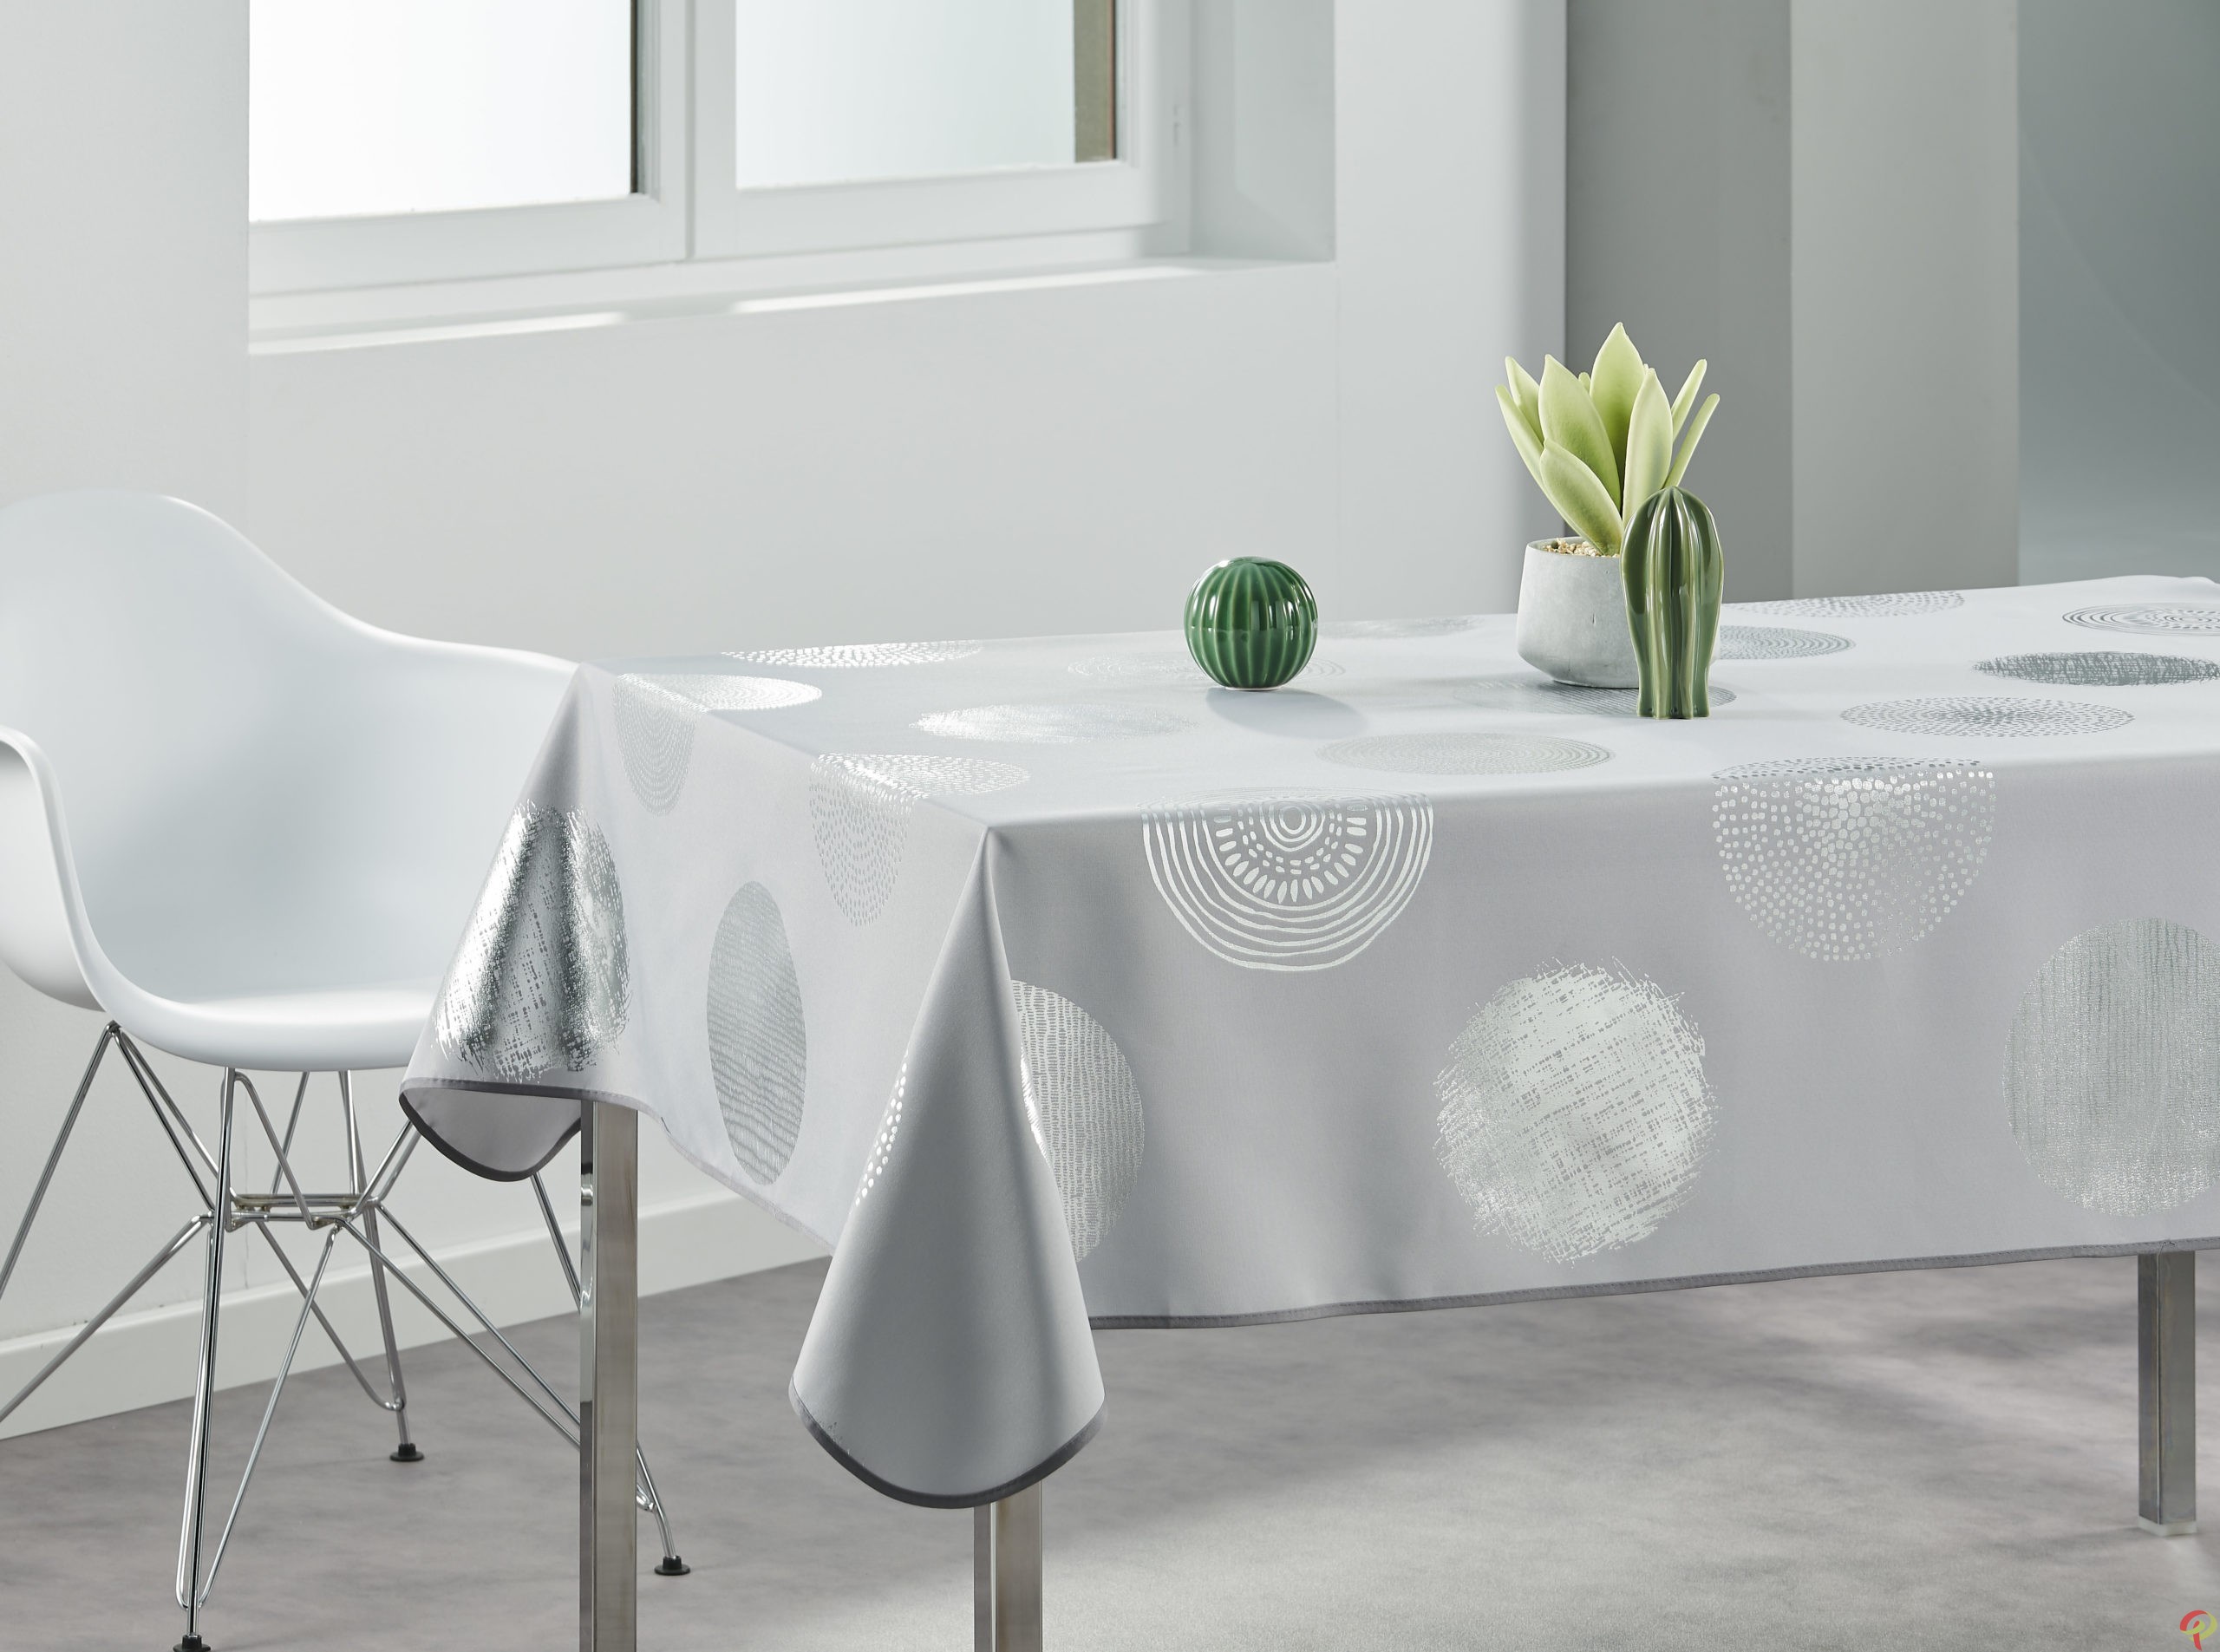 https://www.prodeco-international.com/wp-content/uploads/2019/11/Nappe-rectangulaire-105510-GRIS-scaled.jpg